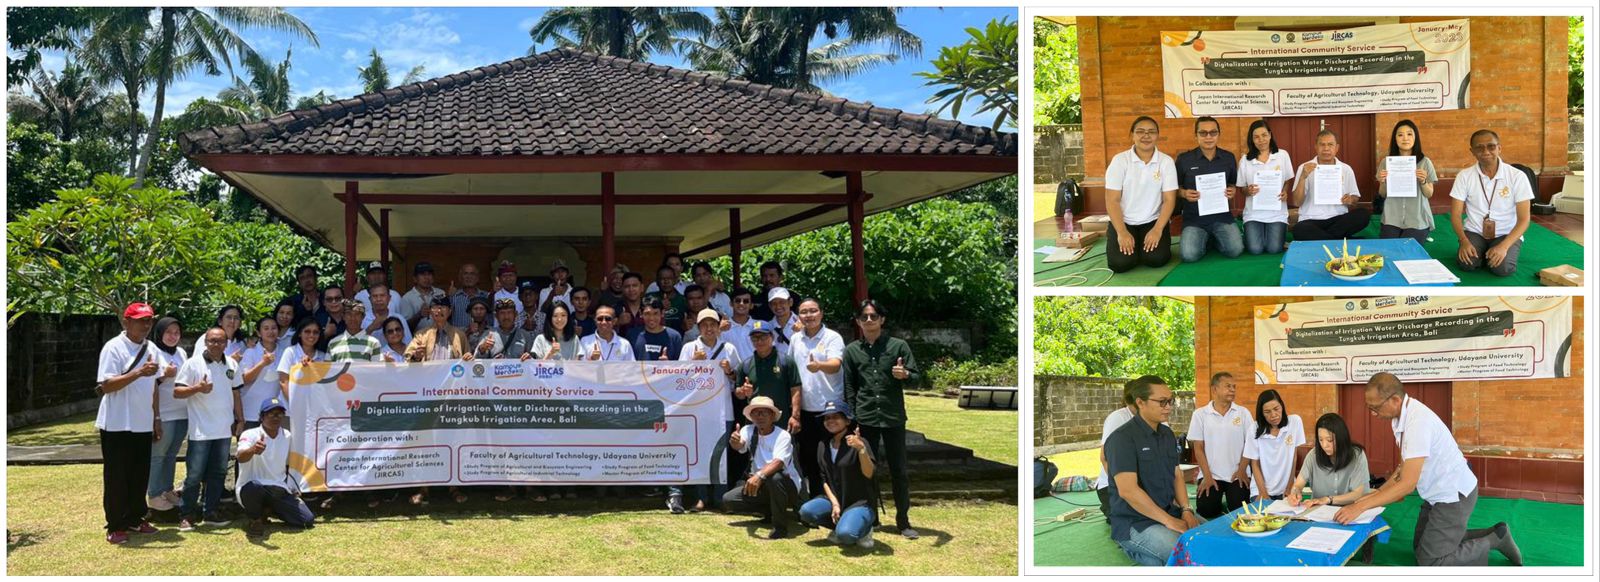 Realization of Collaboration, FTP Unud Collaborates with JIRCAS Japan Carry out Community Service in the Tungkub Irrigation Area, Mengwi Bali